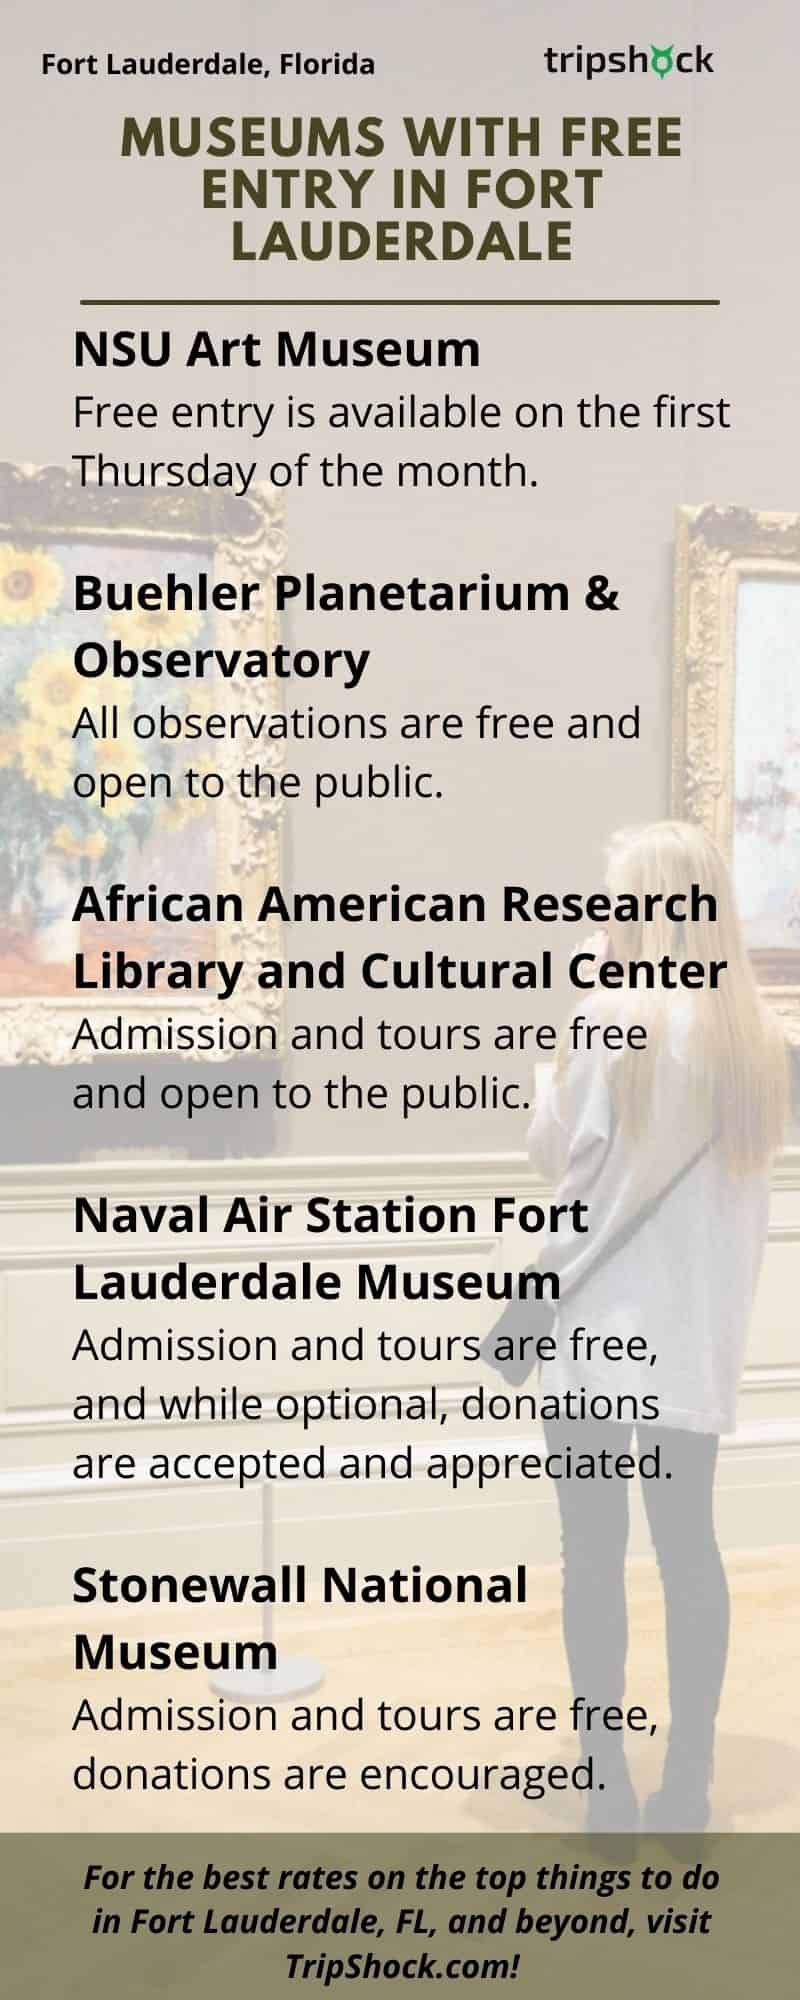 Museums with Free Entry in Fort Lauderdale